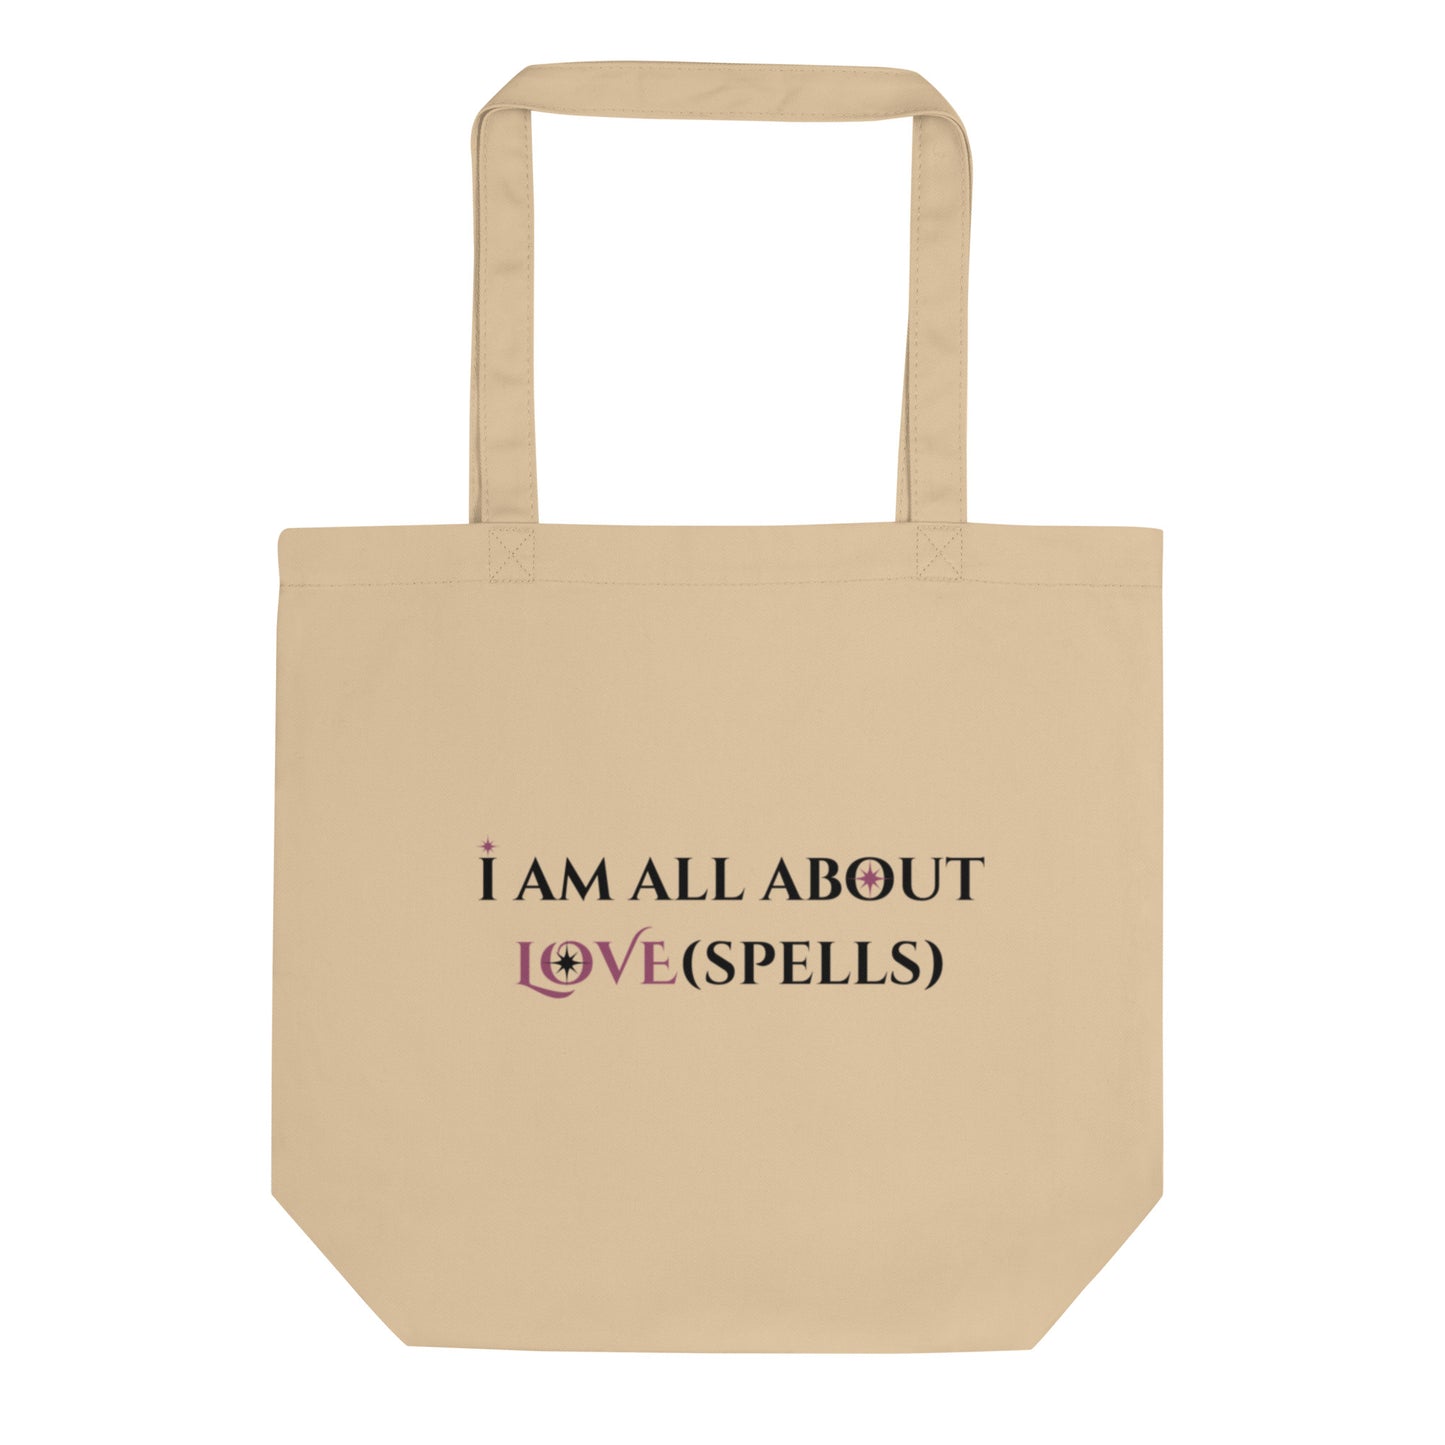 I am all about LOVE(spells) Light Eco Tote Bag